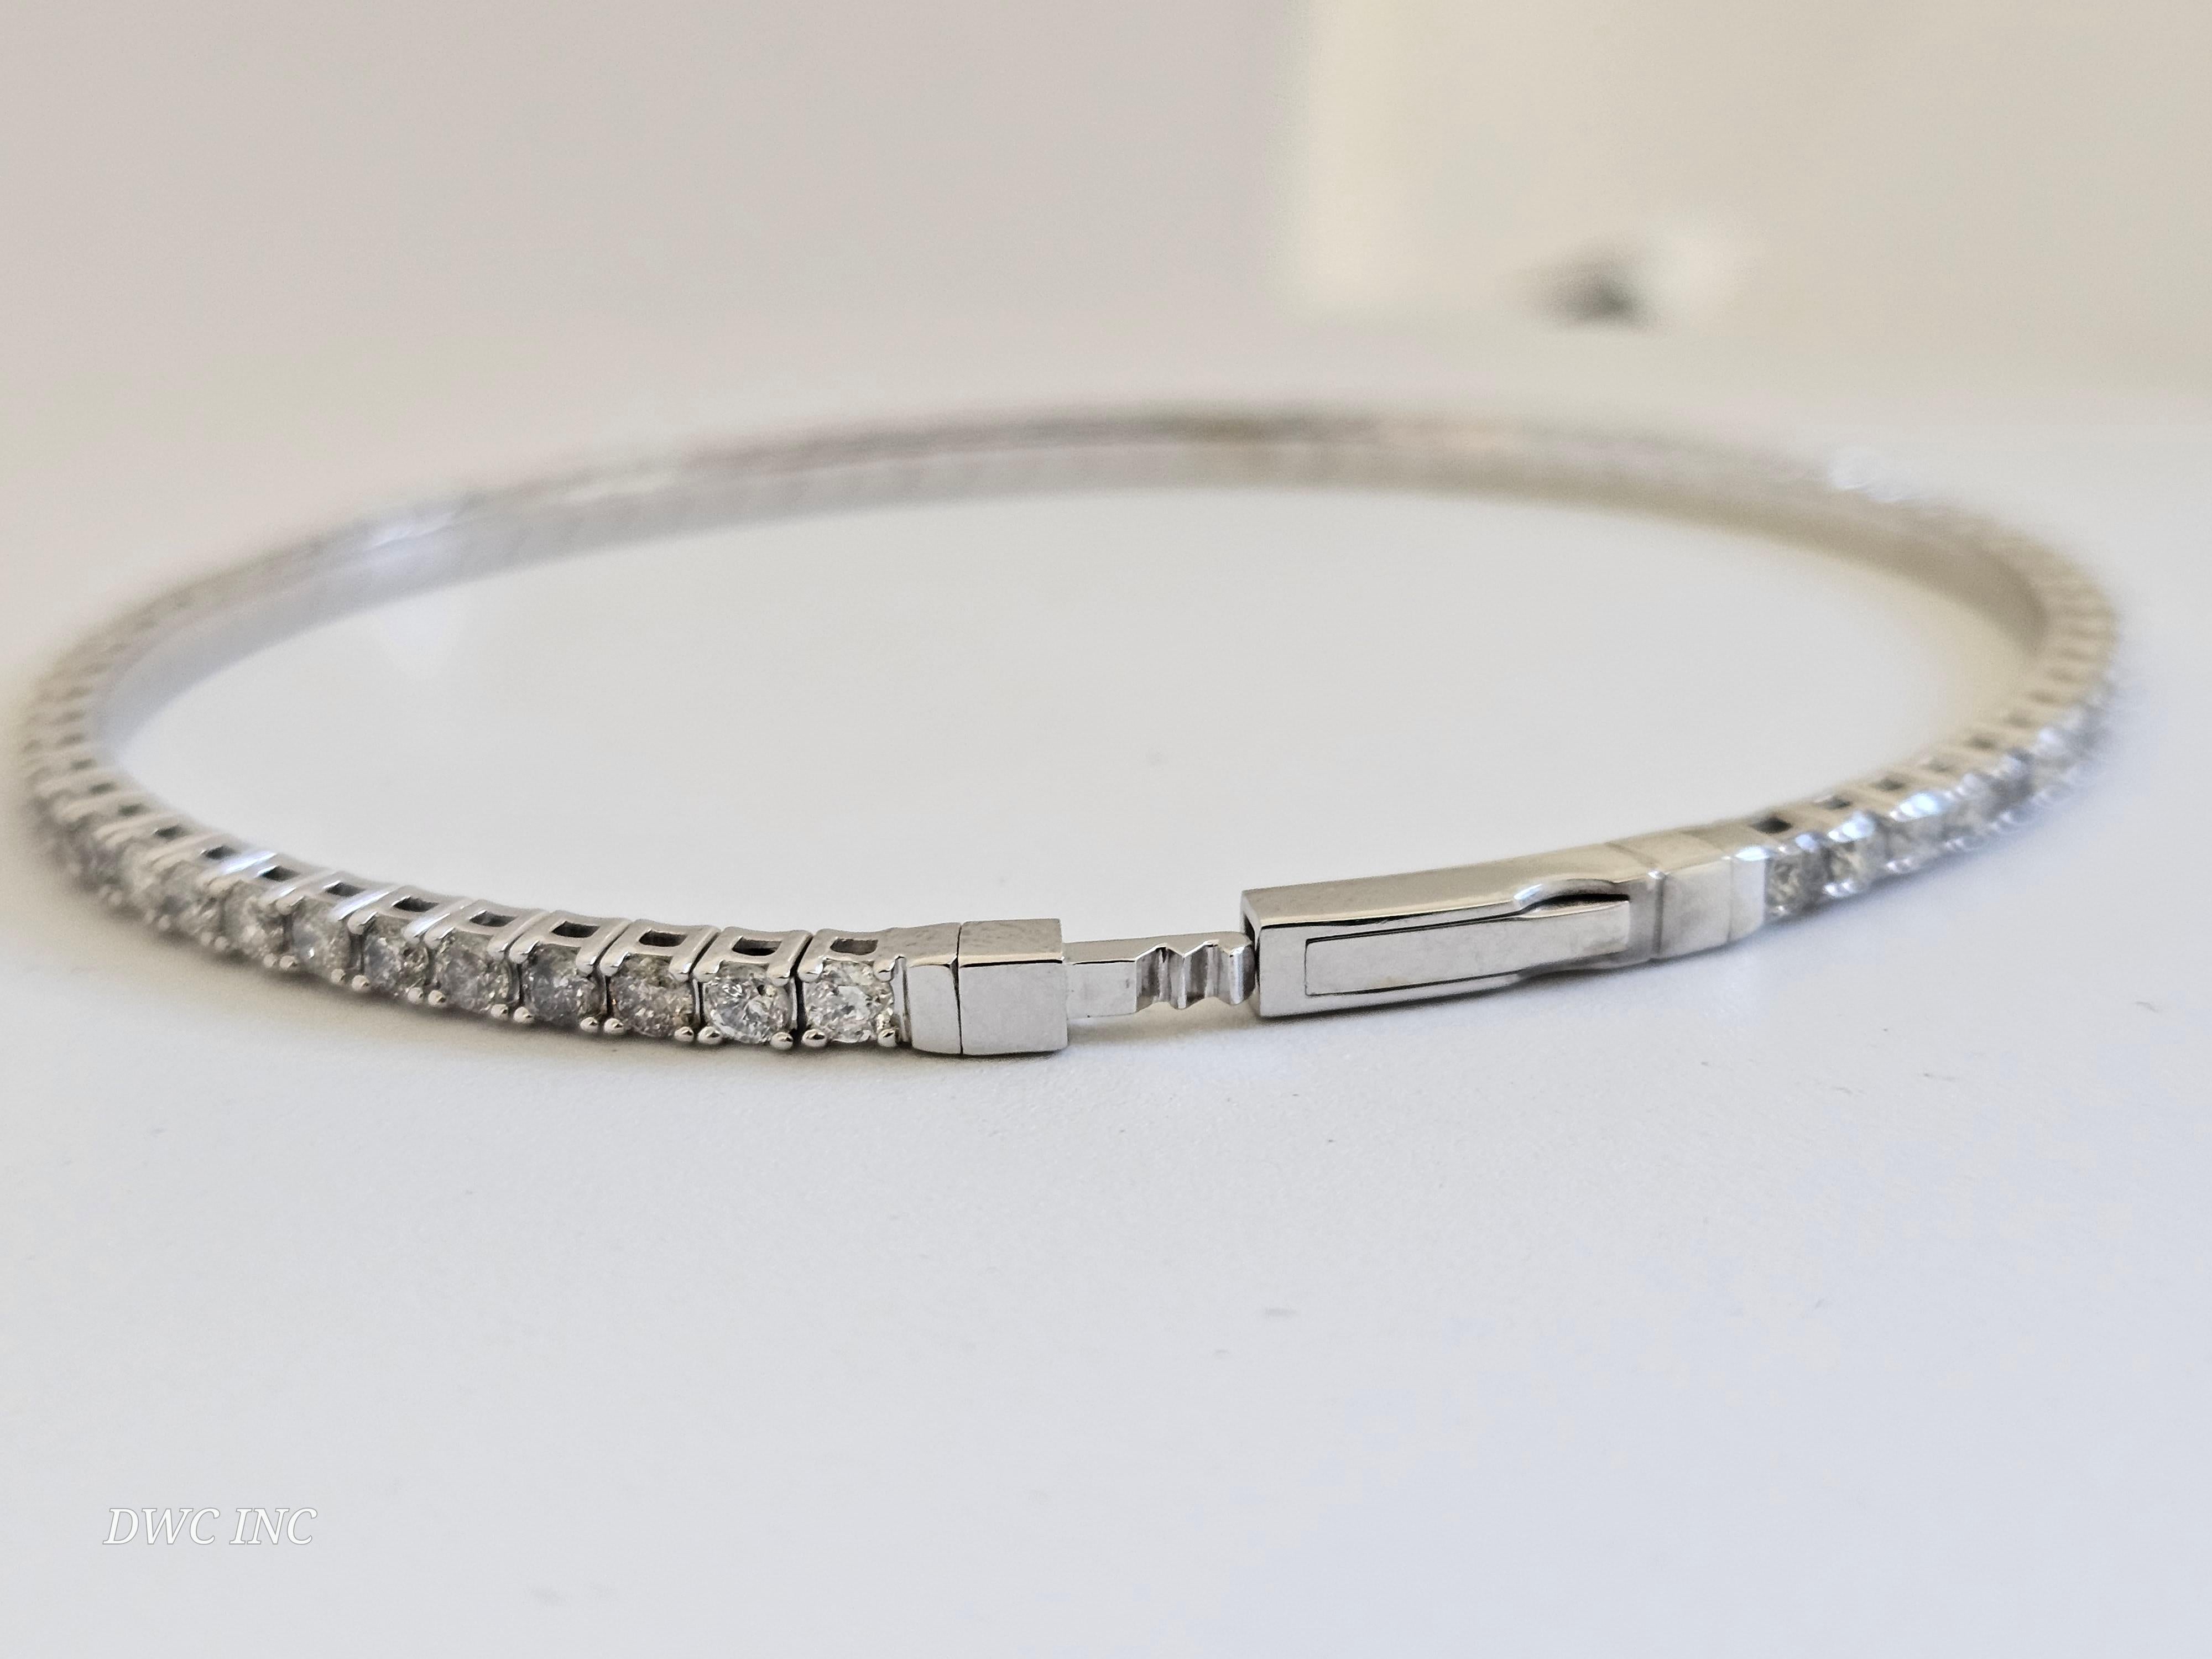 2.25 Carat Round Brilliant Cut Diamond Full Bangle Bracelet 14 Karat White Gold In New Condition For Sale In Great Neck, NY